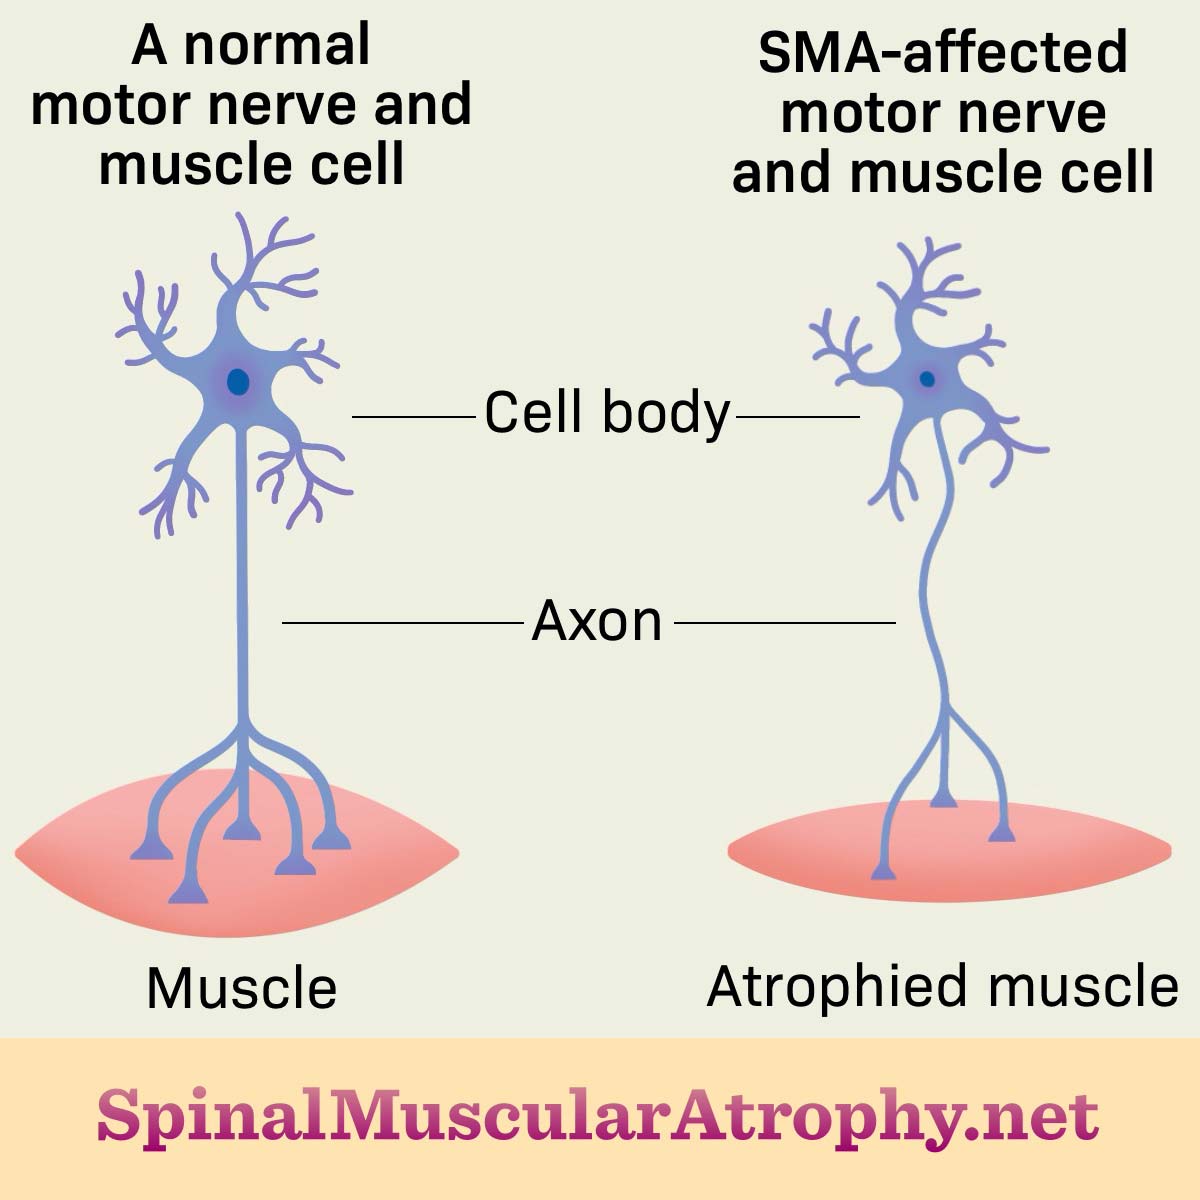 A normal “motor” nerve and muscle cell compared to an SMA-affected “motor” nerve and muscle cell and how this impacts the size of the muscle